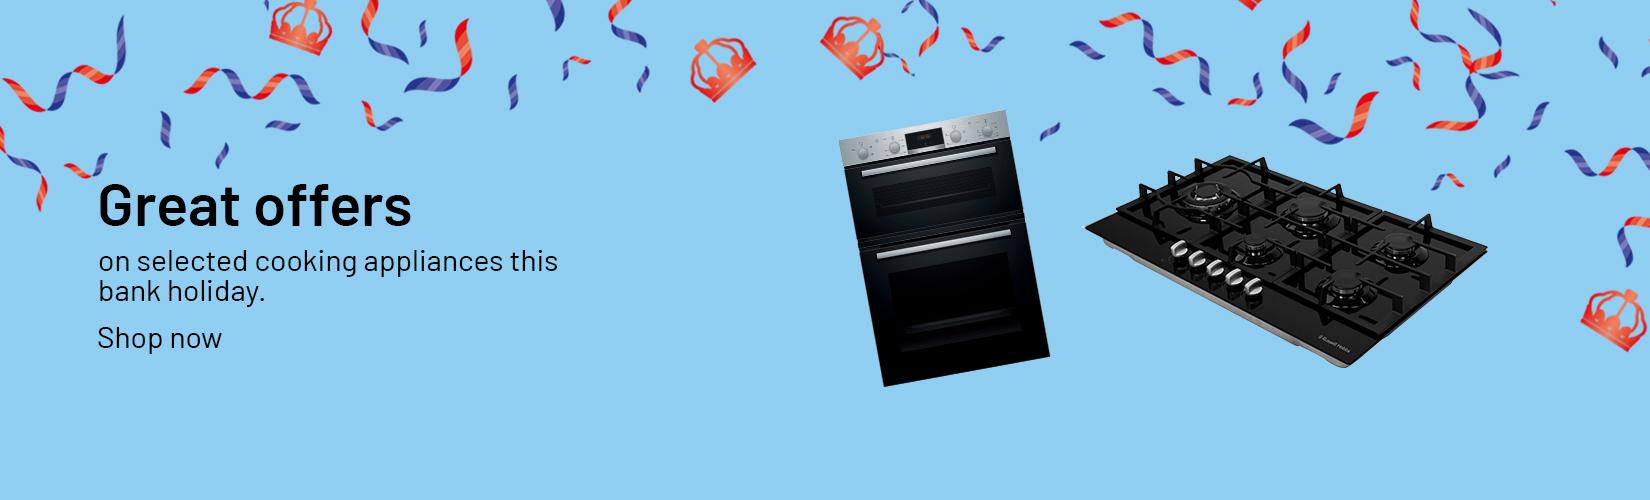 Great offers on selected cooking appliances this bank holiday. Shop now.